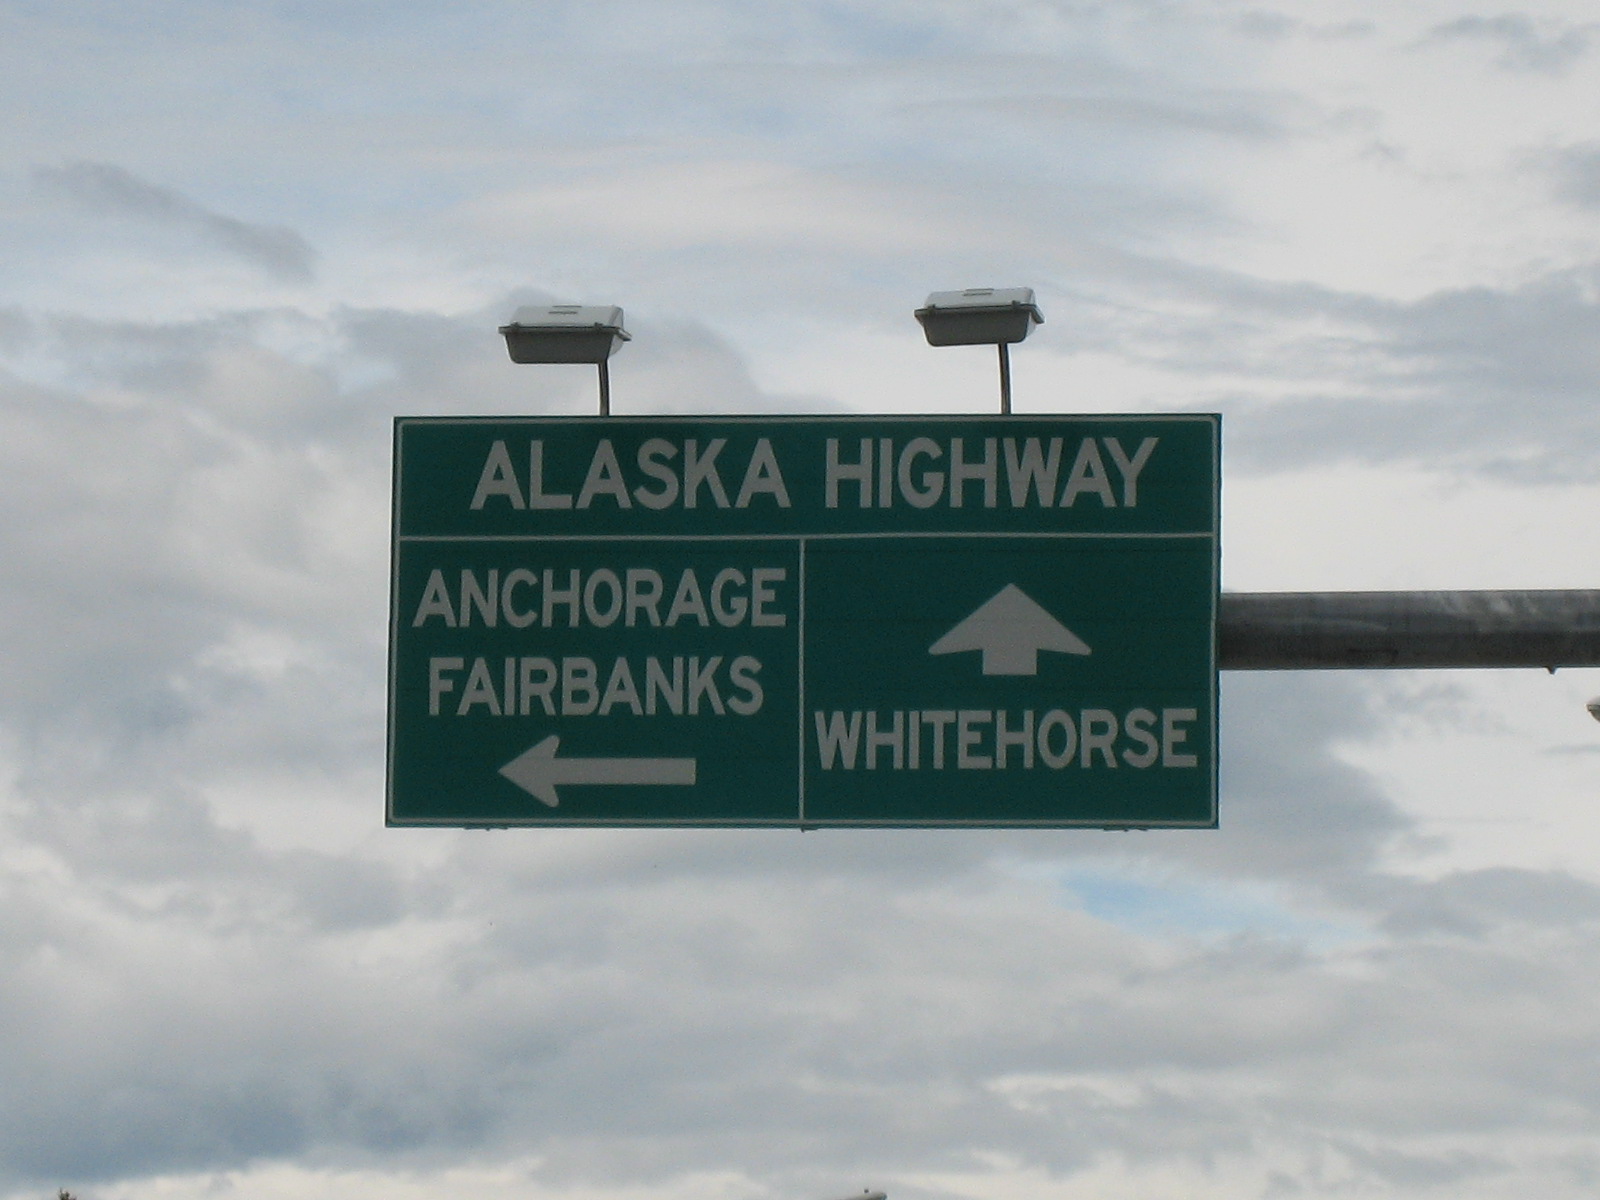 [26+at+the+junction+of+Haines+Hwy+and+the+Alaska+Highway+-+Anchorage,+I'm+coming!.JPG]